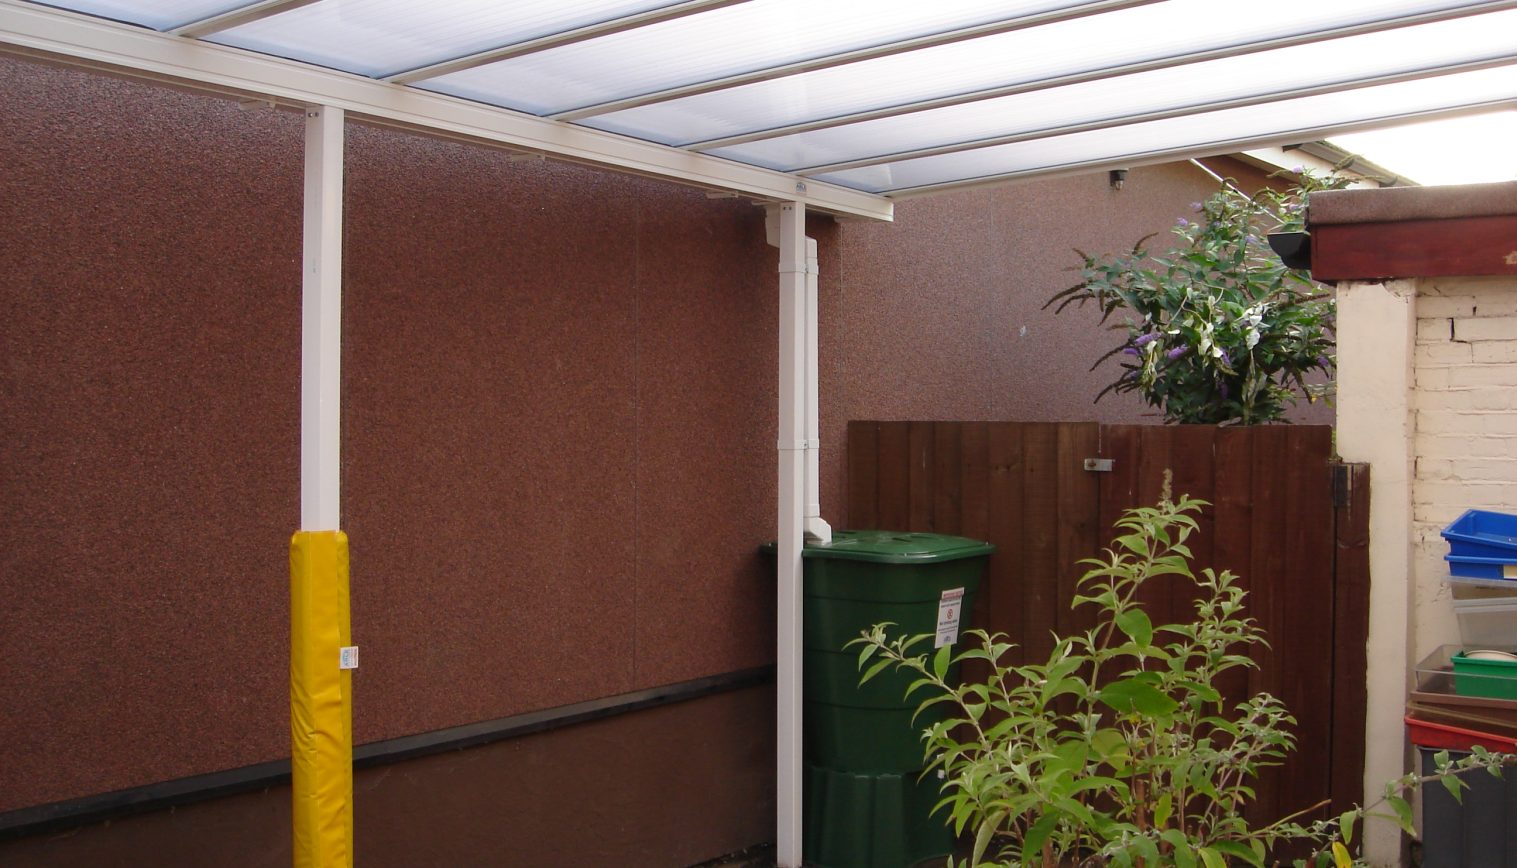 Victoria Road Primary School – Wall Mounted Canopy